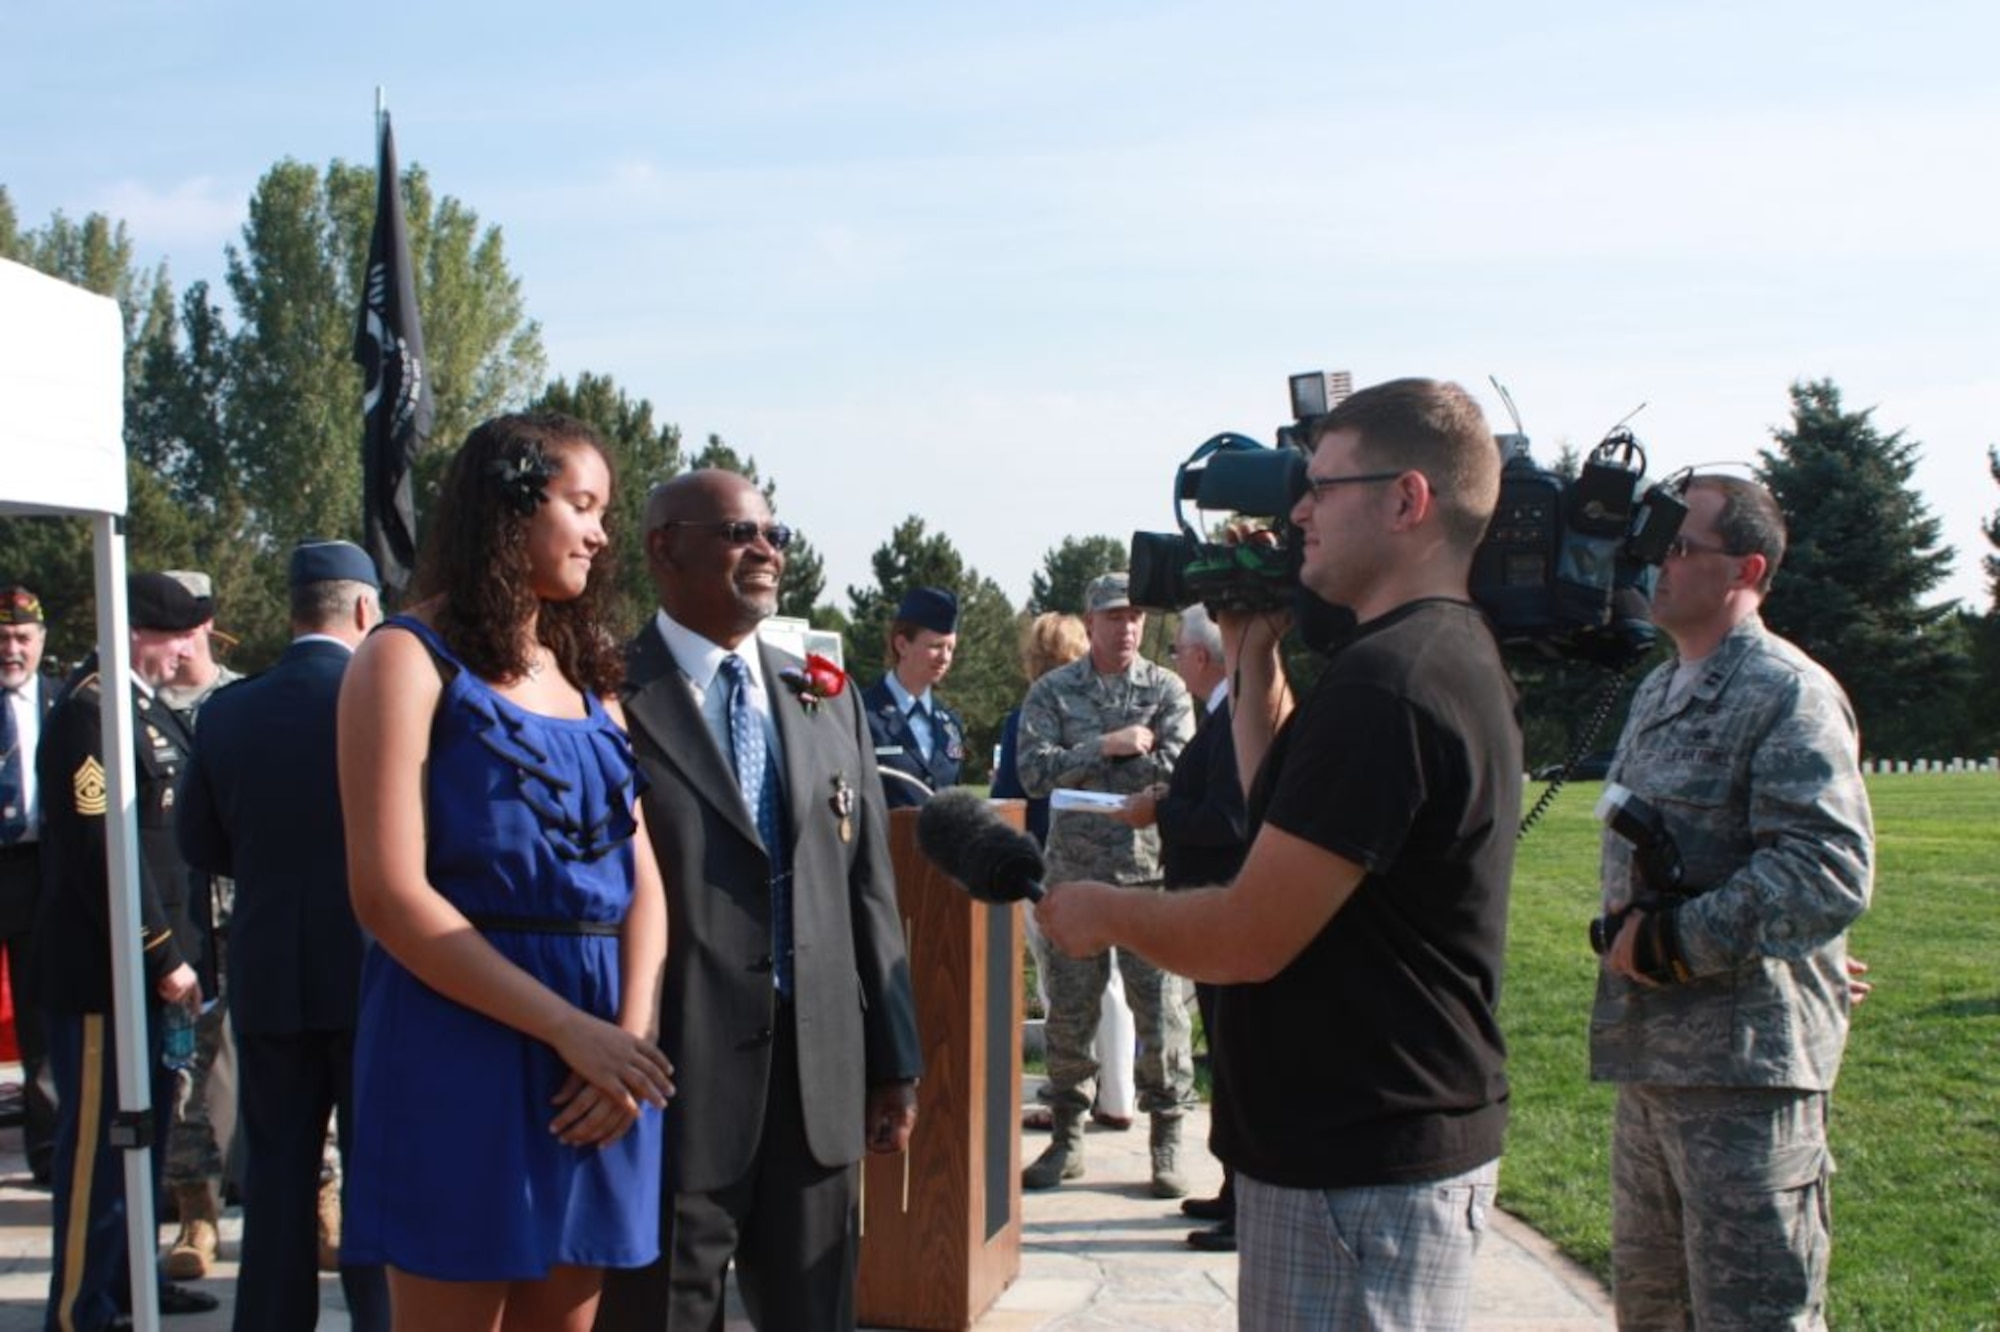 Retired Master Sgt. James Hughes, middle, accompanied by his step-daughter Kalee Maricle-Hughes, left, answers questions to local media after the POW Medal ceremony at Fort Logan National Cemetery, Denver, Colo.,  Aug. 22, 2012. Hughes has been taken as hostage in Iran for 16 days, beginning Nov. 4, 1979 and after 32 years recently received the POW Medal in recognition of his sacrifices. (Courtesy photo/Elaine Buehler)